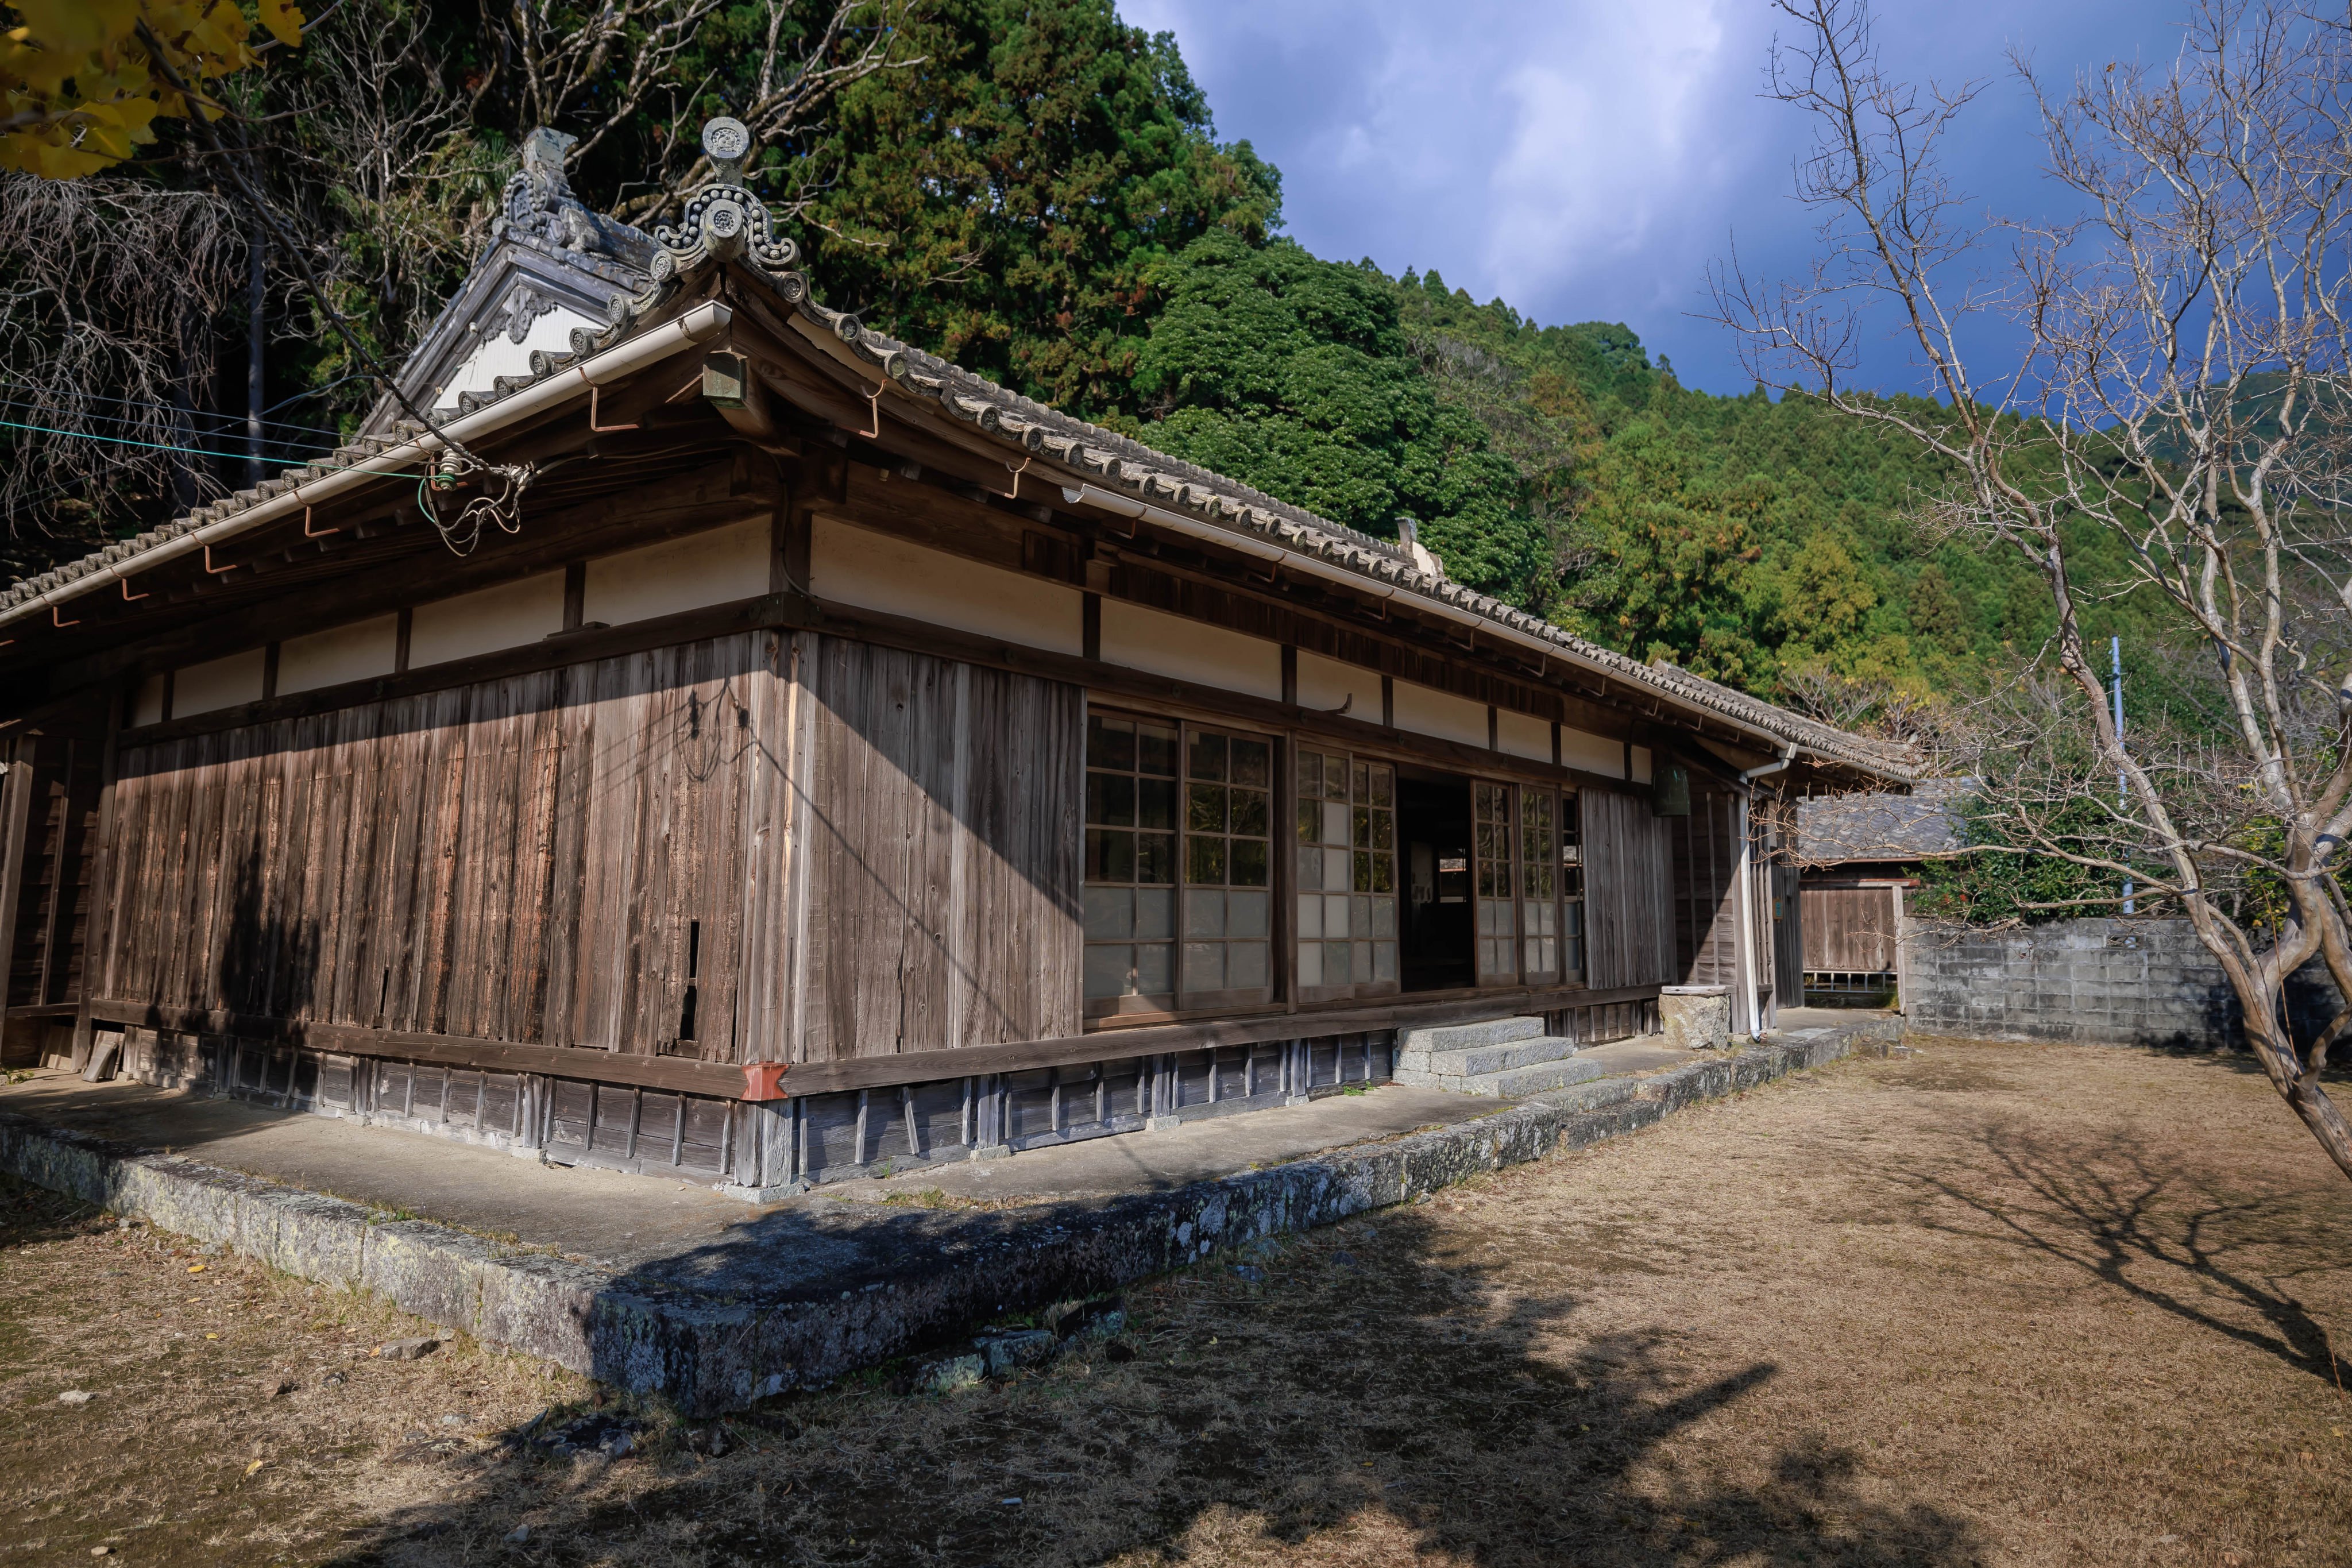 This abandoned temple in Japan’s Wakayama prefecture will become a unique overnight attraction for tourists under start-up PlanetDao’s plans. Photo: Handout